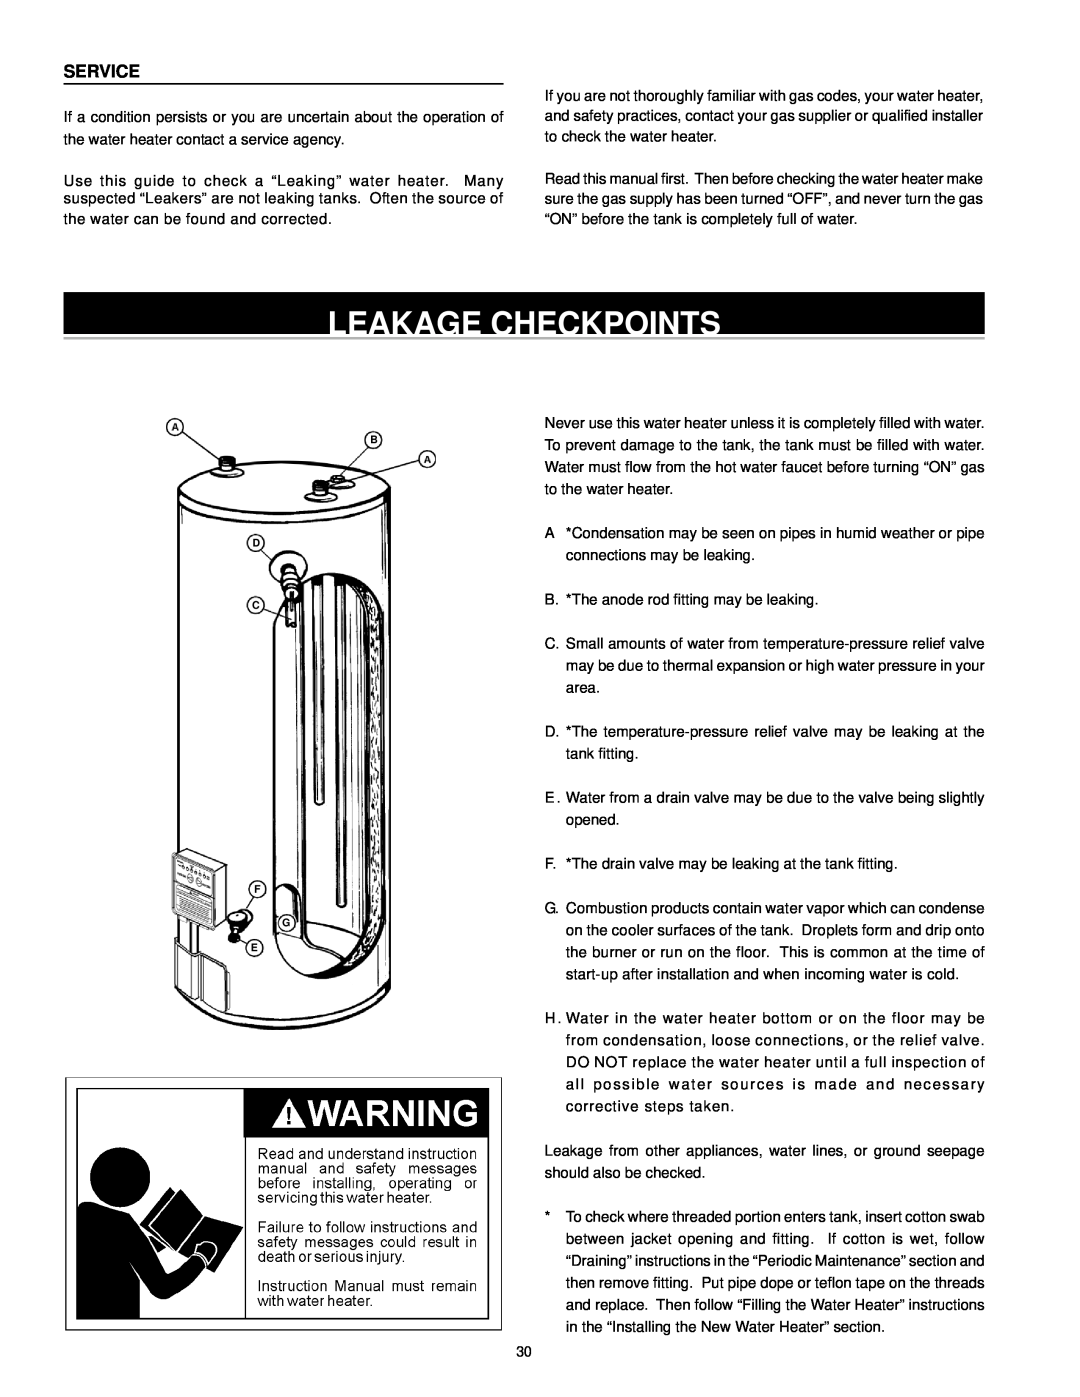 A.O. Smith ARGSS02708 instruction manual Leakage Checkpoints, Service 